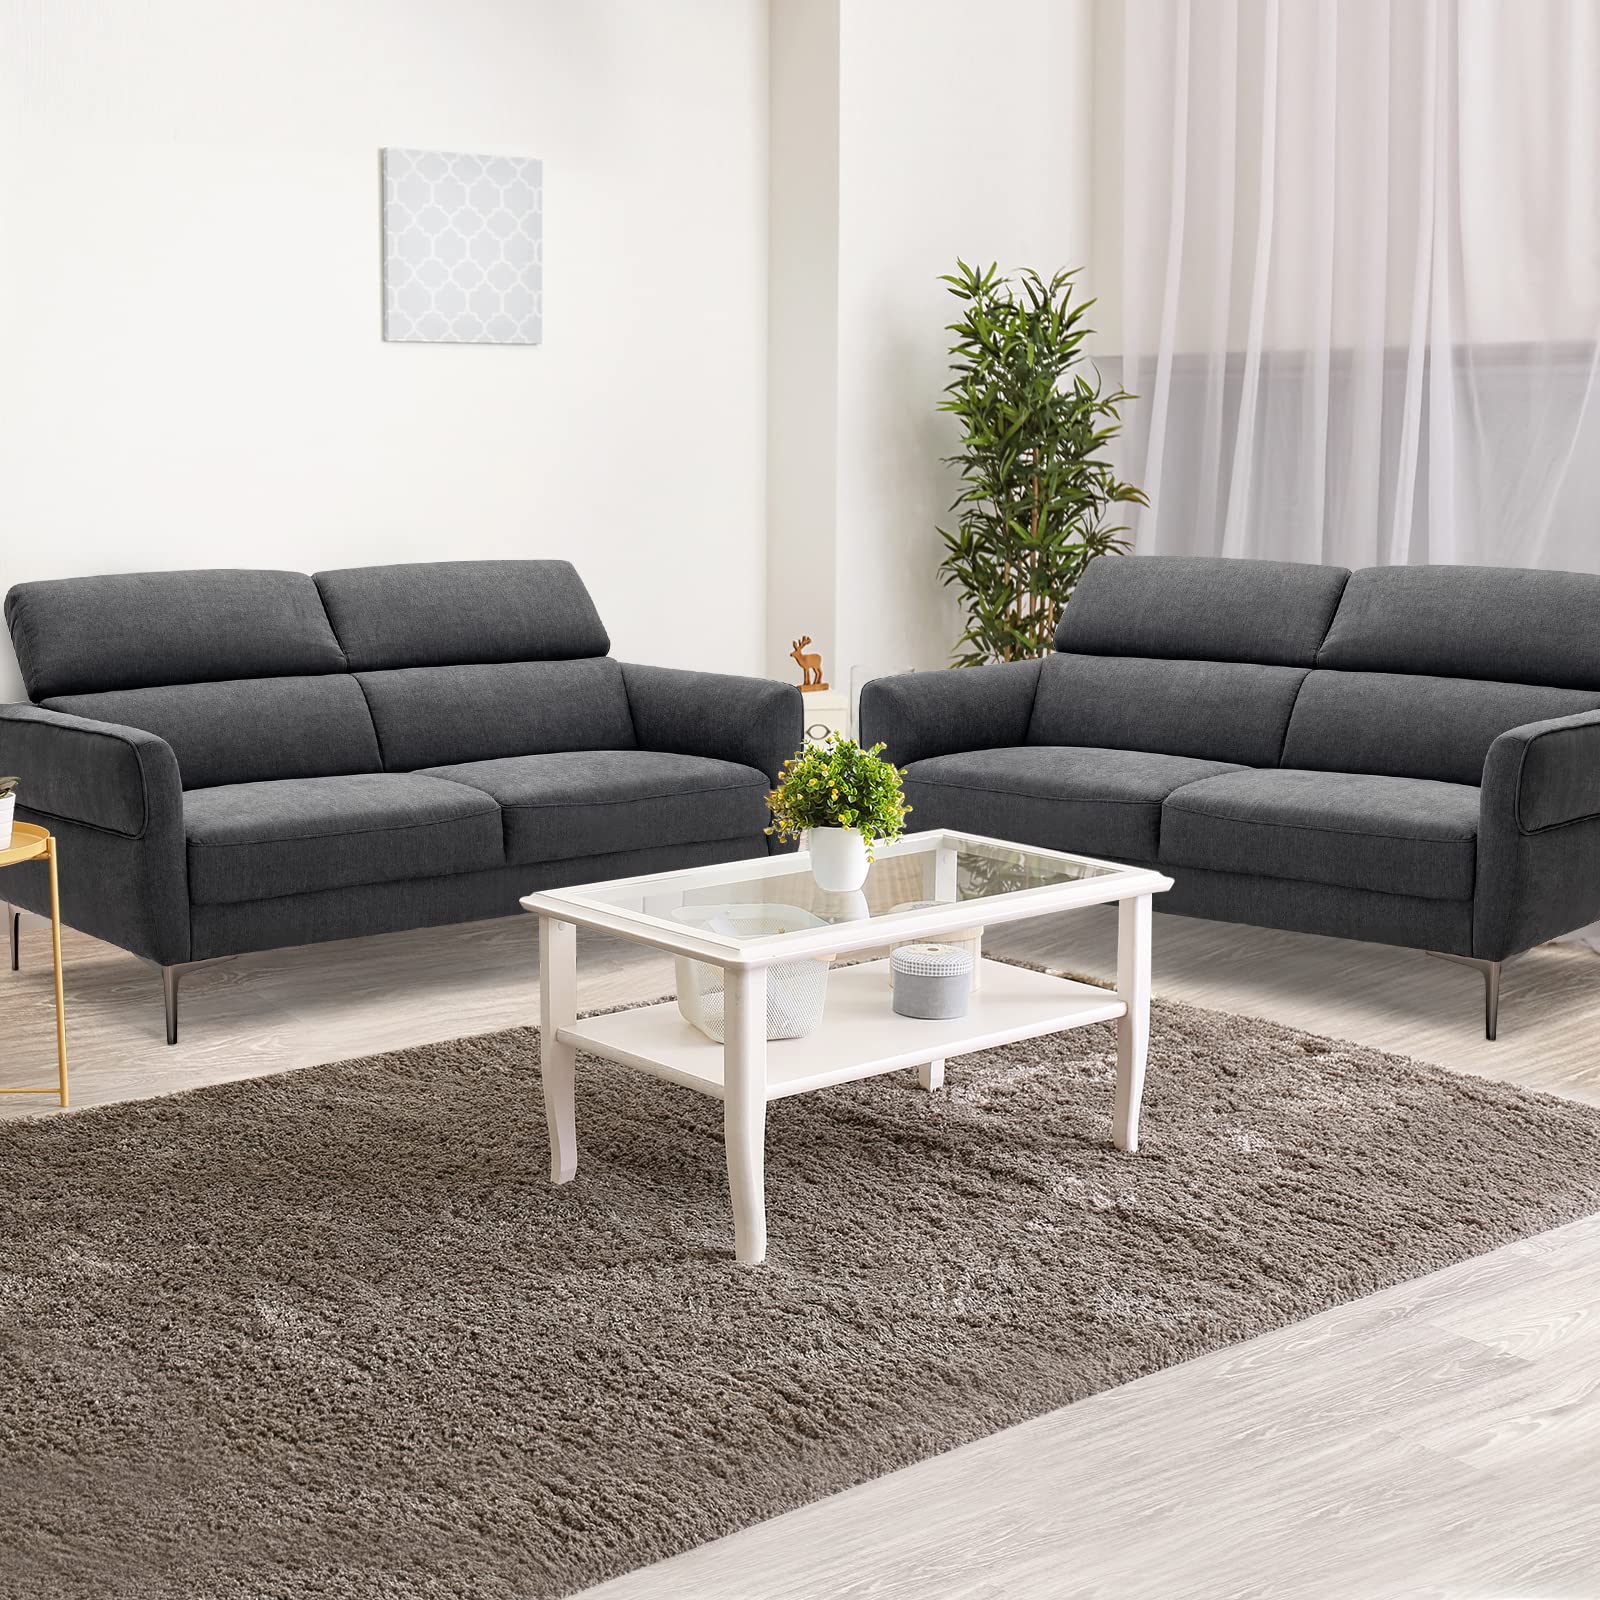 Giantex Couch, Upholstered Loveseat with Lift-up Headrest and Metal Legs